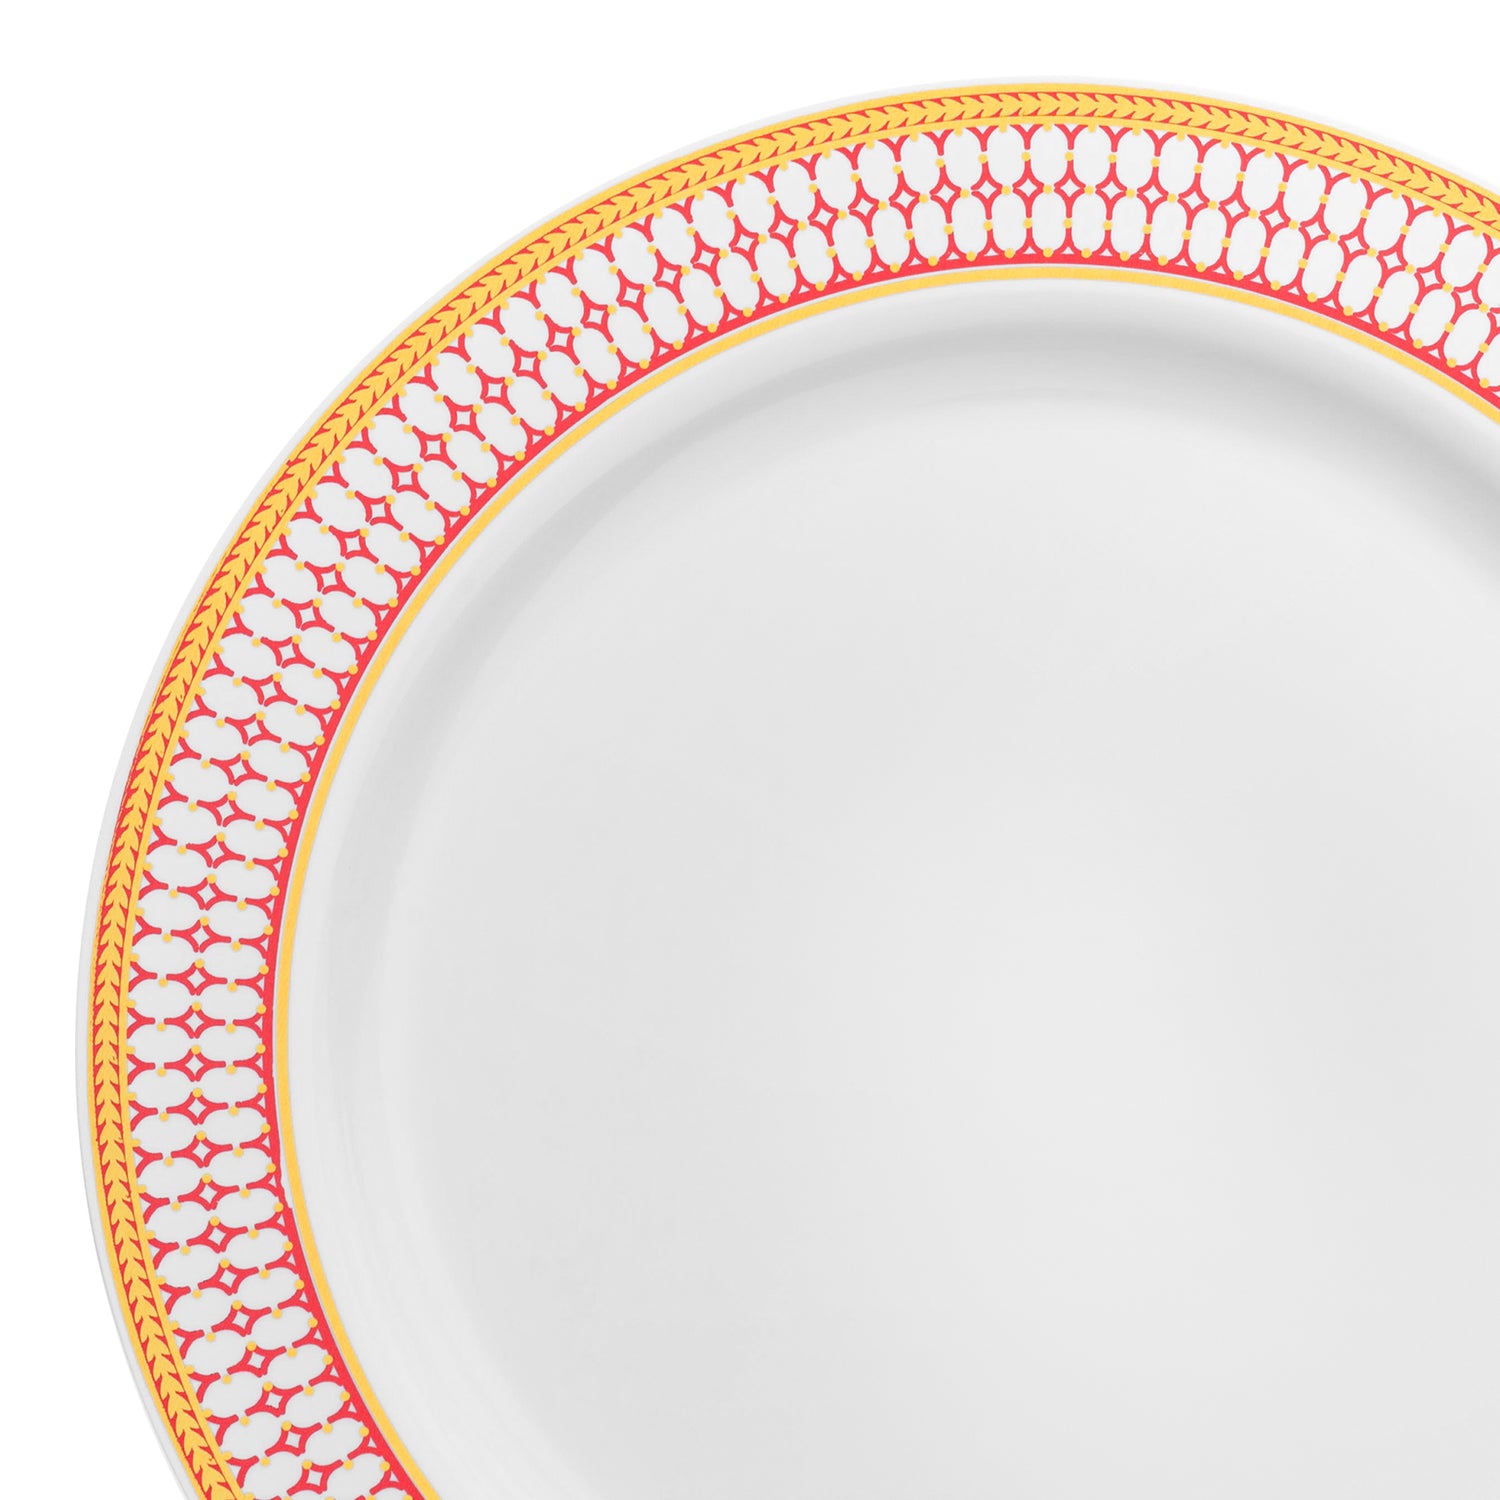 White with Red and Gold Chord Rim Plastic Appetizer/Salad Plates | The Kaya Collection